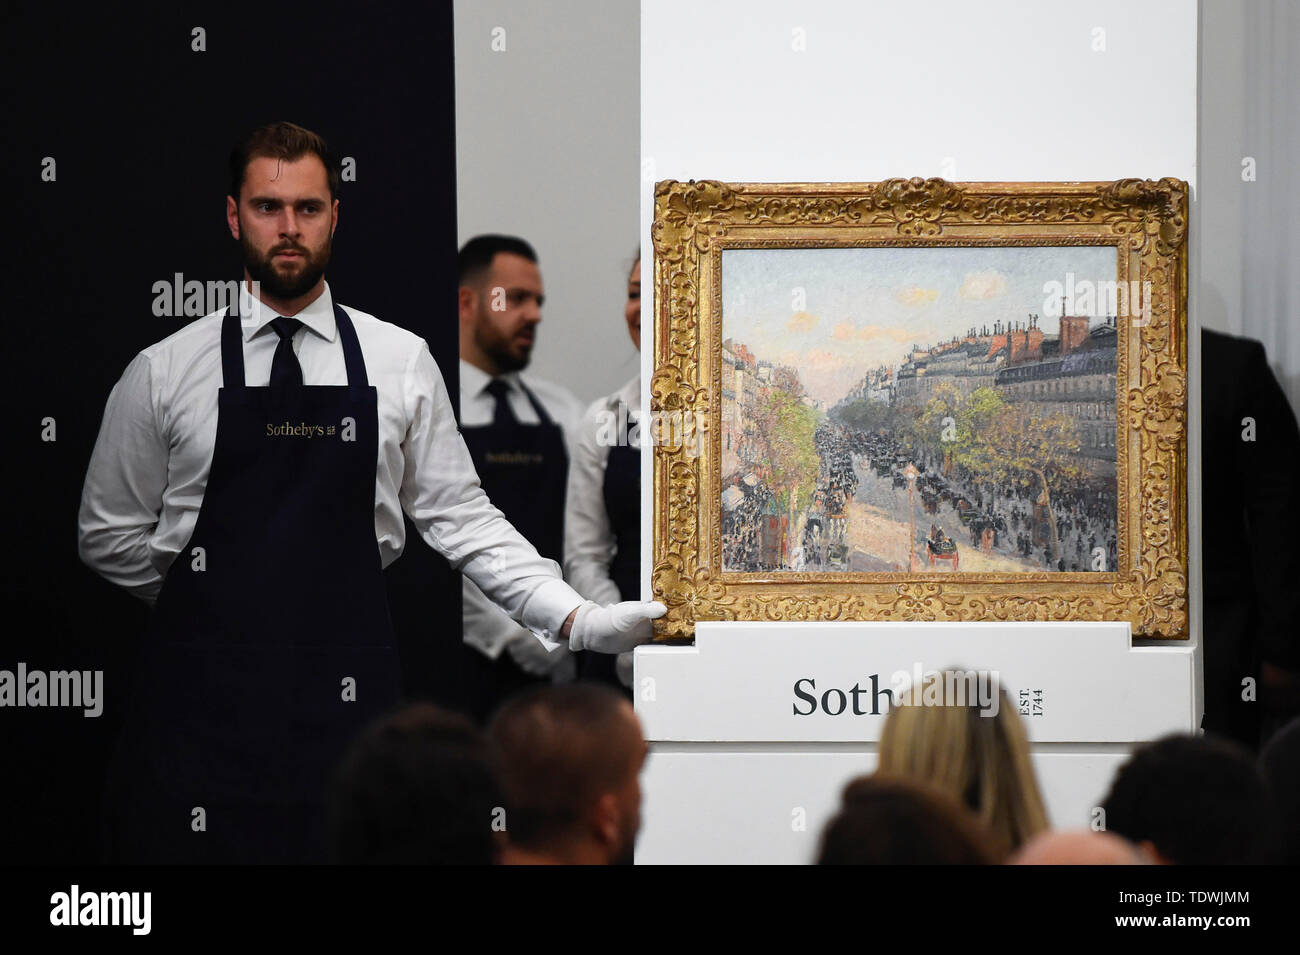 London, UK.  19 June 2019. A technician presents ''Le Boulevard Montmartre, Fin De Journée'' by Camille Pissarro, (Est. £3,500,000 - 5,000,000) which sold for a hammer price of £6,100,000 at Sotheby's Impressionist & Modern art evening sale in New Bond Street.  This is the first major evening sale to take place after Sotheby’s agreed to a takeover by media and telecoms billionaire Patrick Drahi in a deal valued at $3.7bn (£2.9bn).  The big five global auction houses (Sotheby's, Christie's, Bonhams, Phillips and China Guardian Auctions) will now be held privately.  Francois Pinault, another Fre Stock Photo